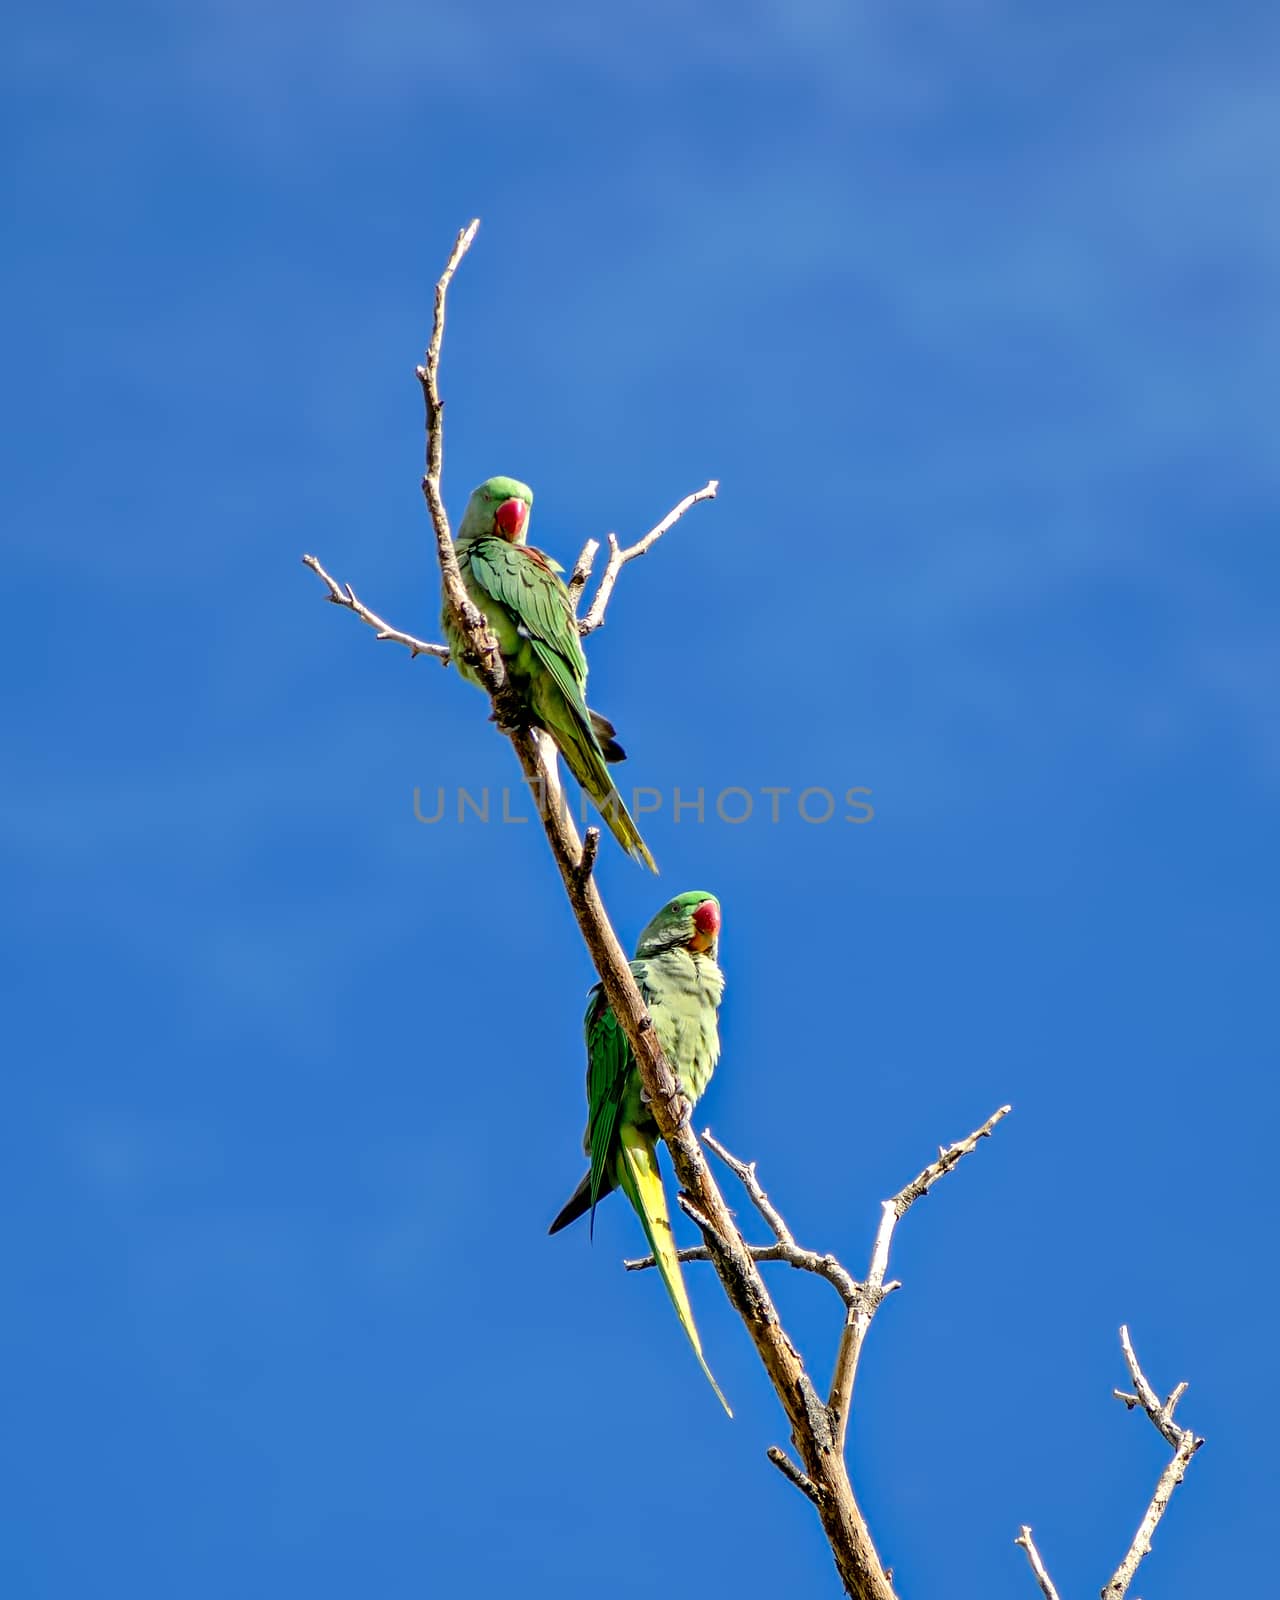 Two Indian ring-necked parakeet parrot sitting on dry tree branch with clear blue sky background.